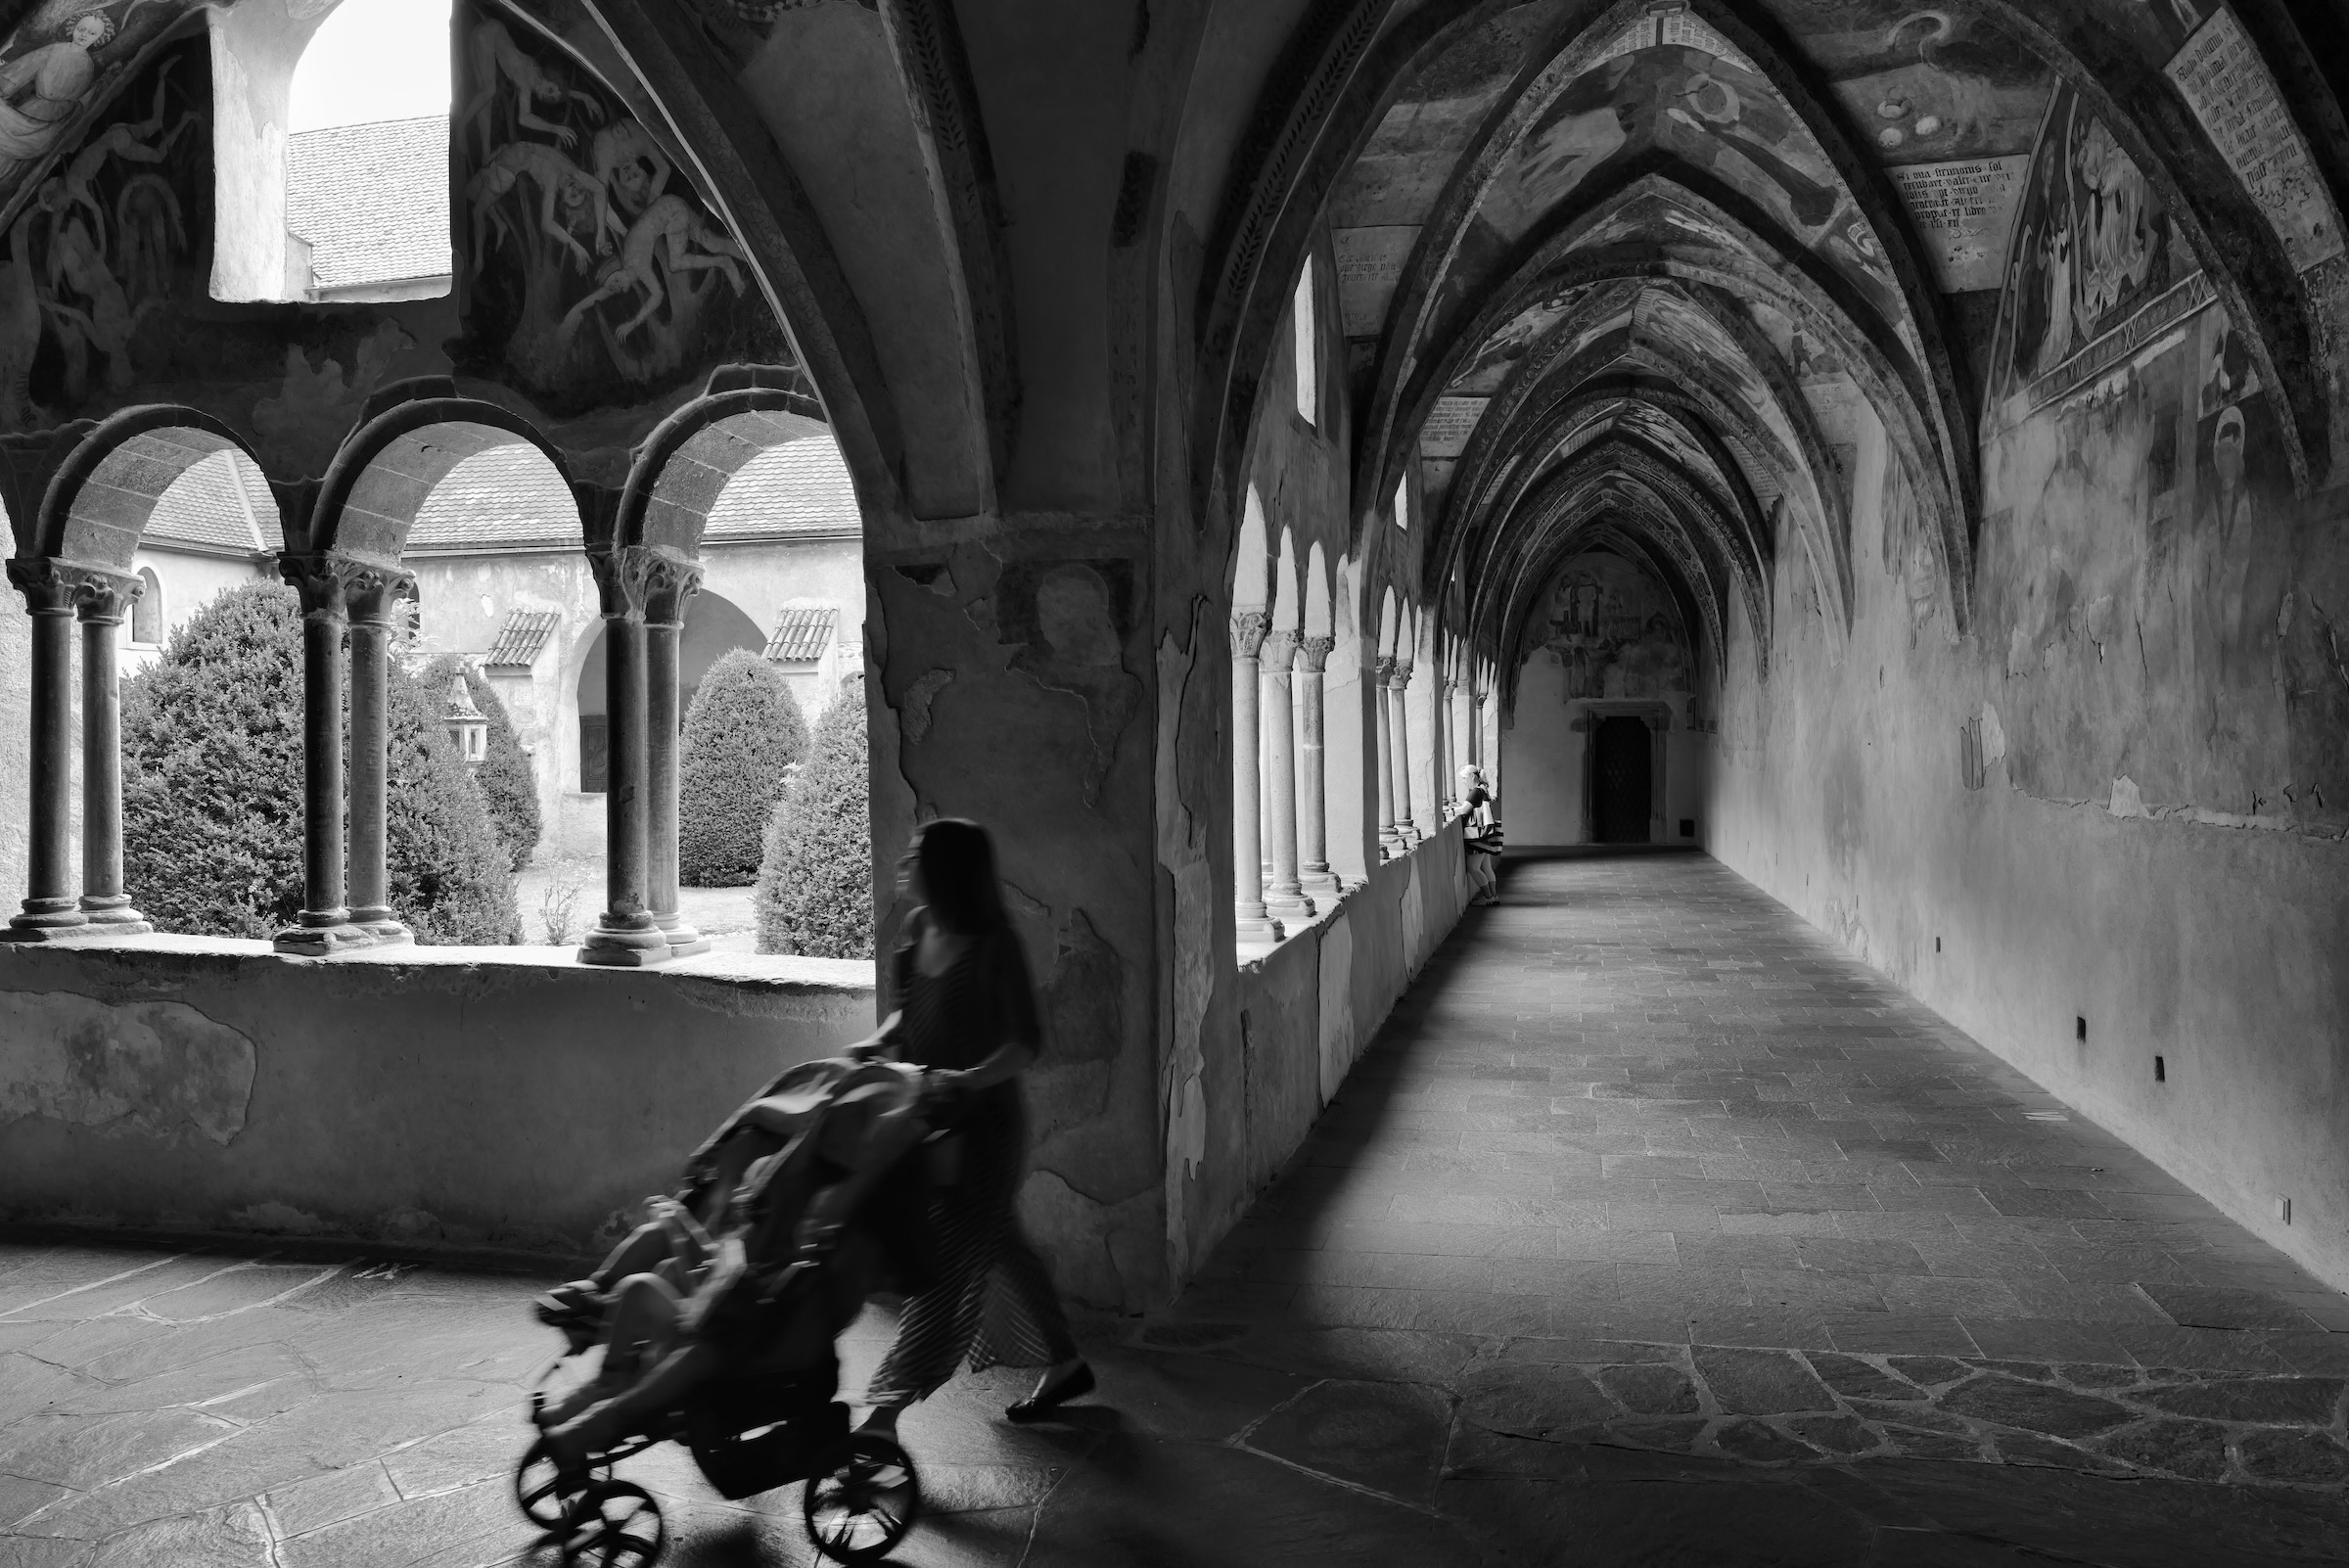 Cloisters and prams...